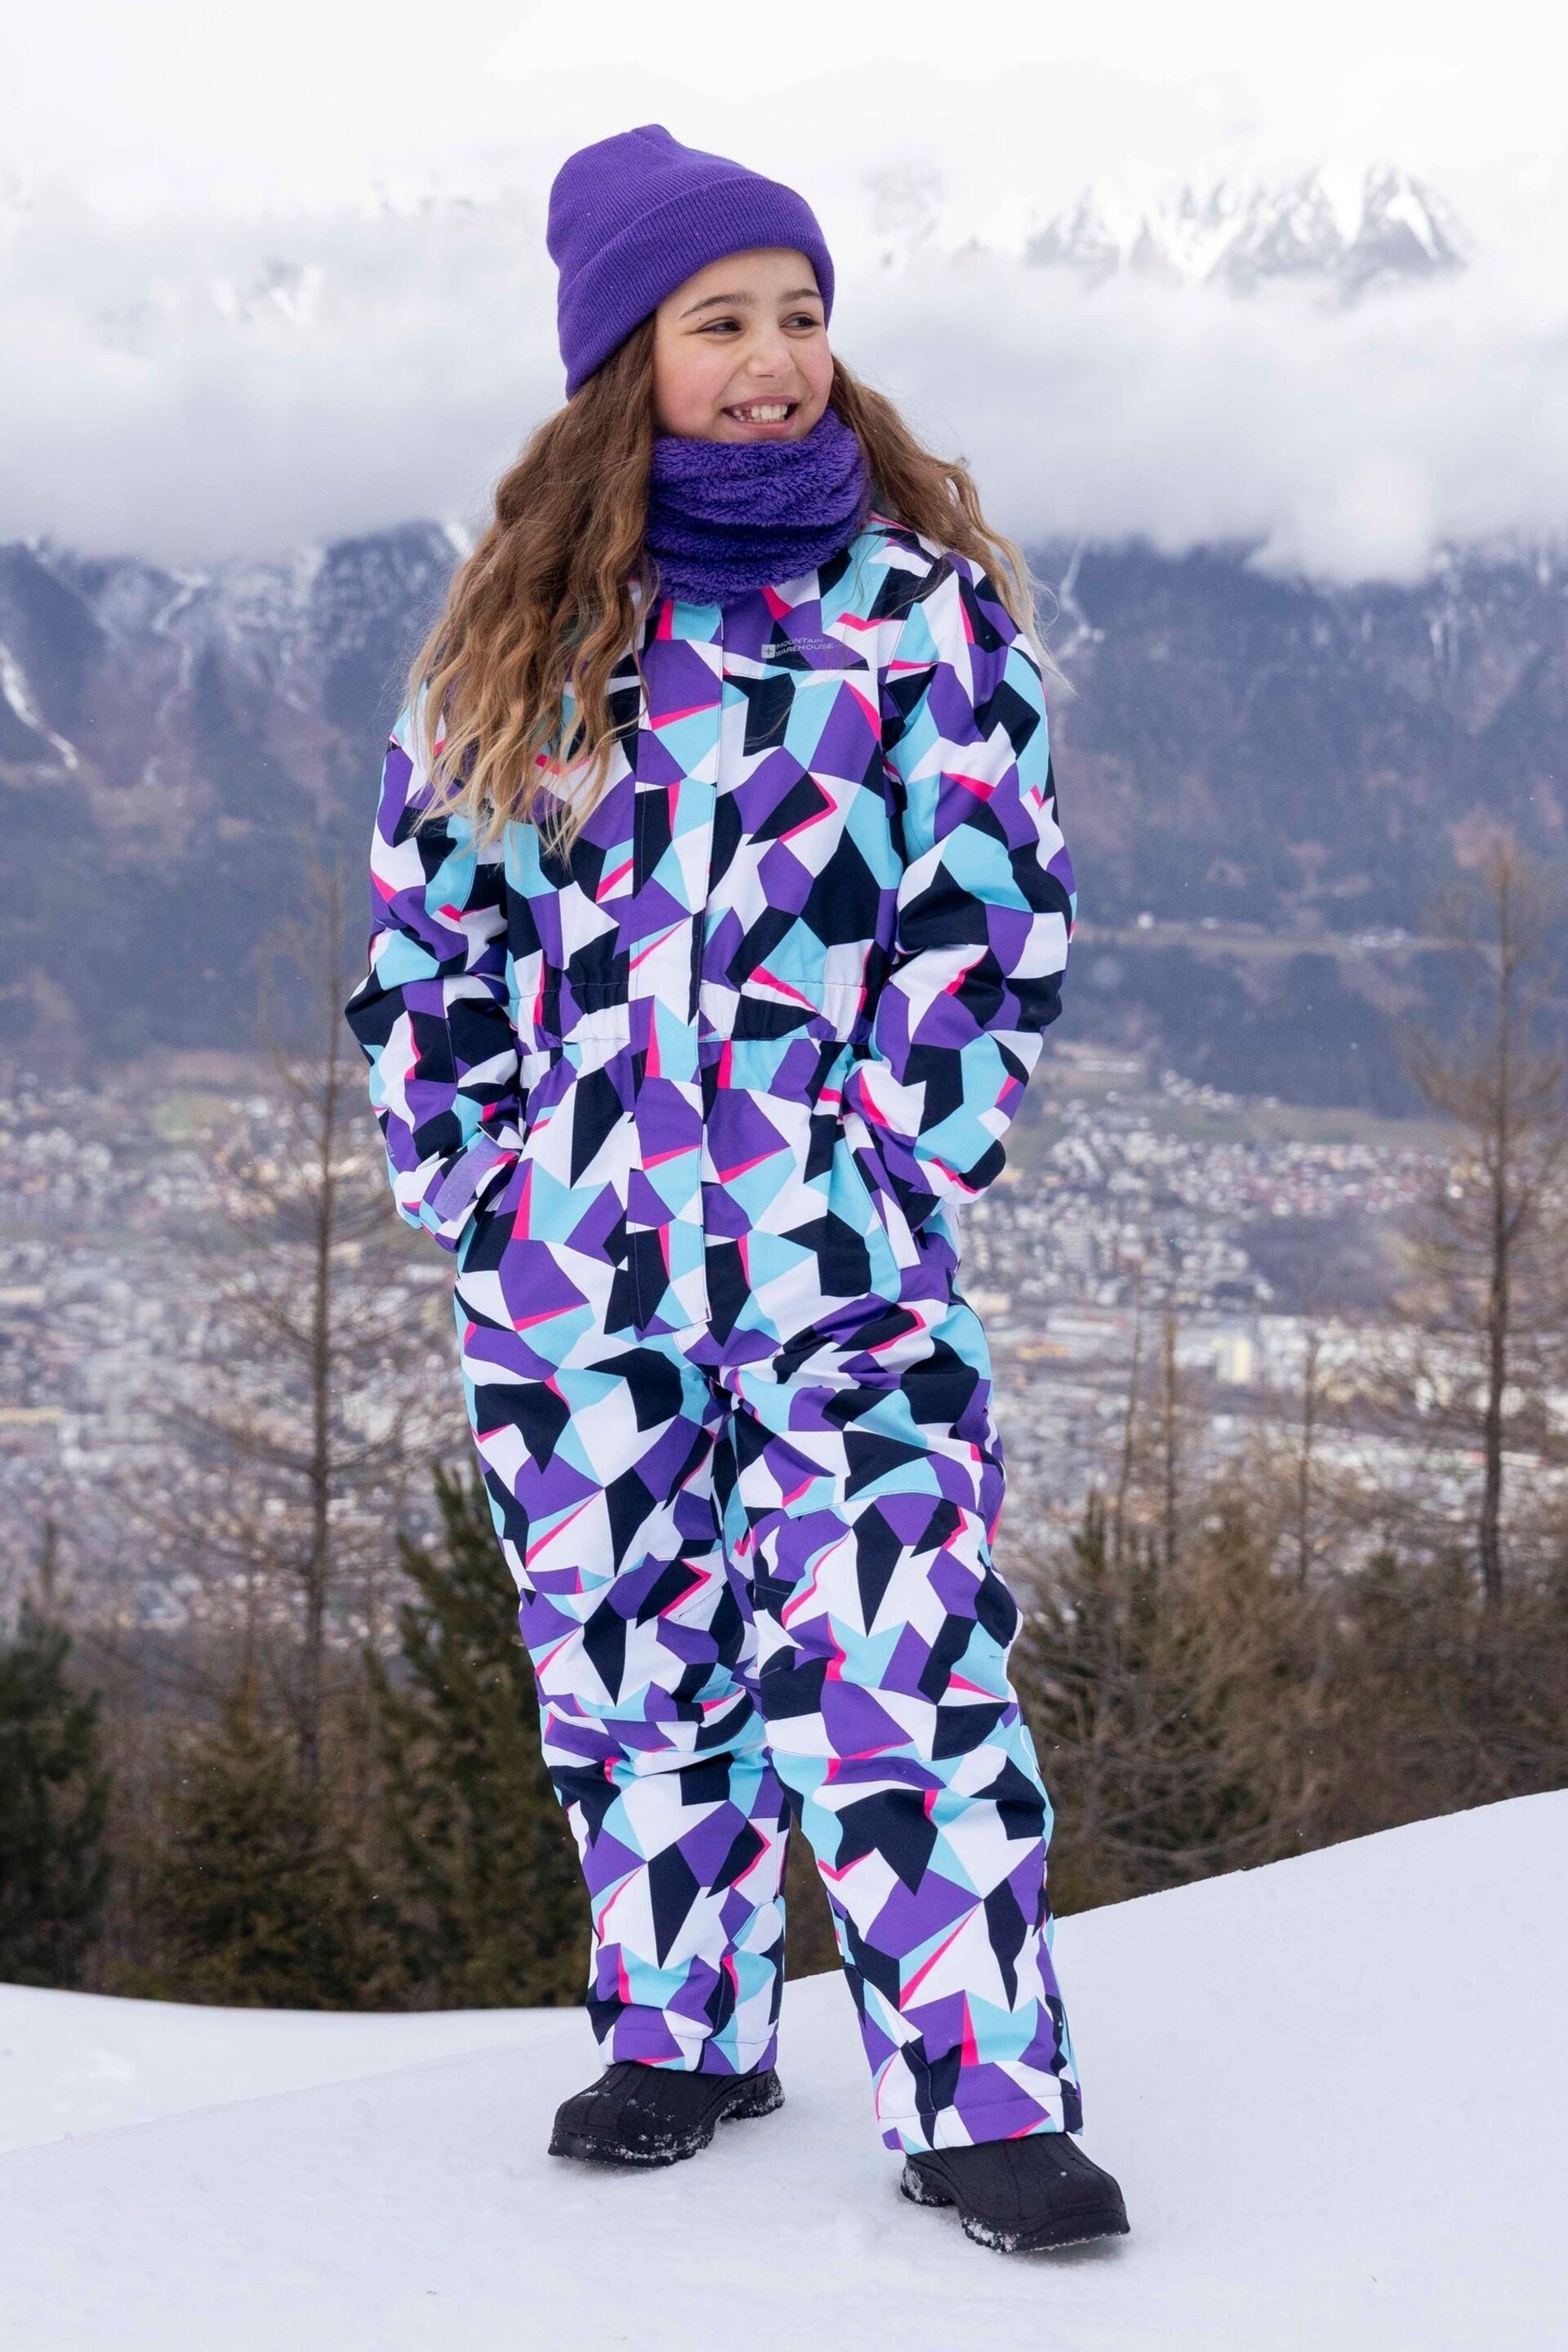 Mountain Warehouse Purple/White Kids Cloud Printed All in One Snowsuit - Image 1 of 6